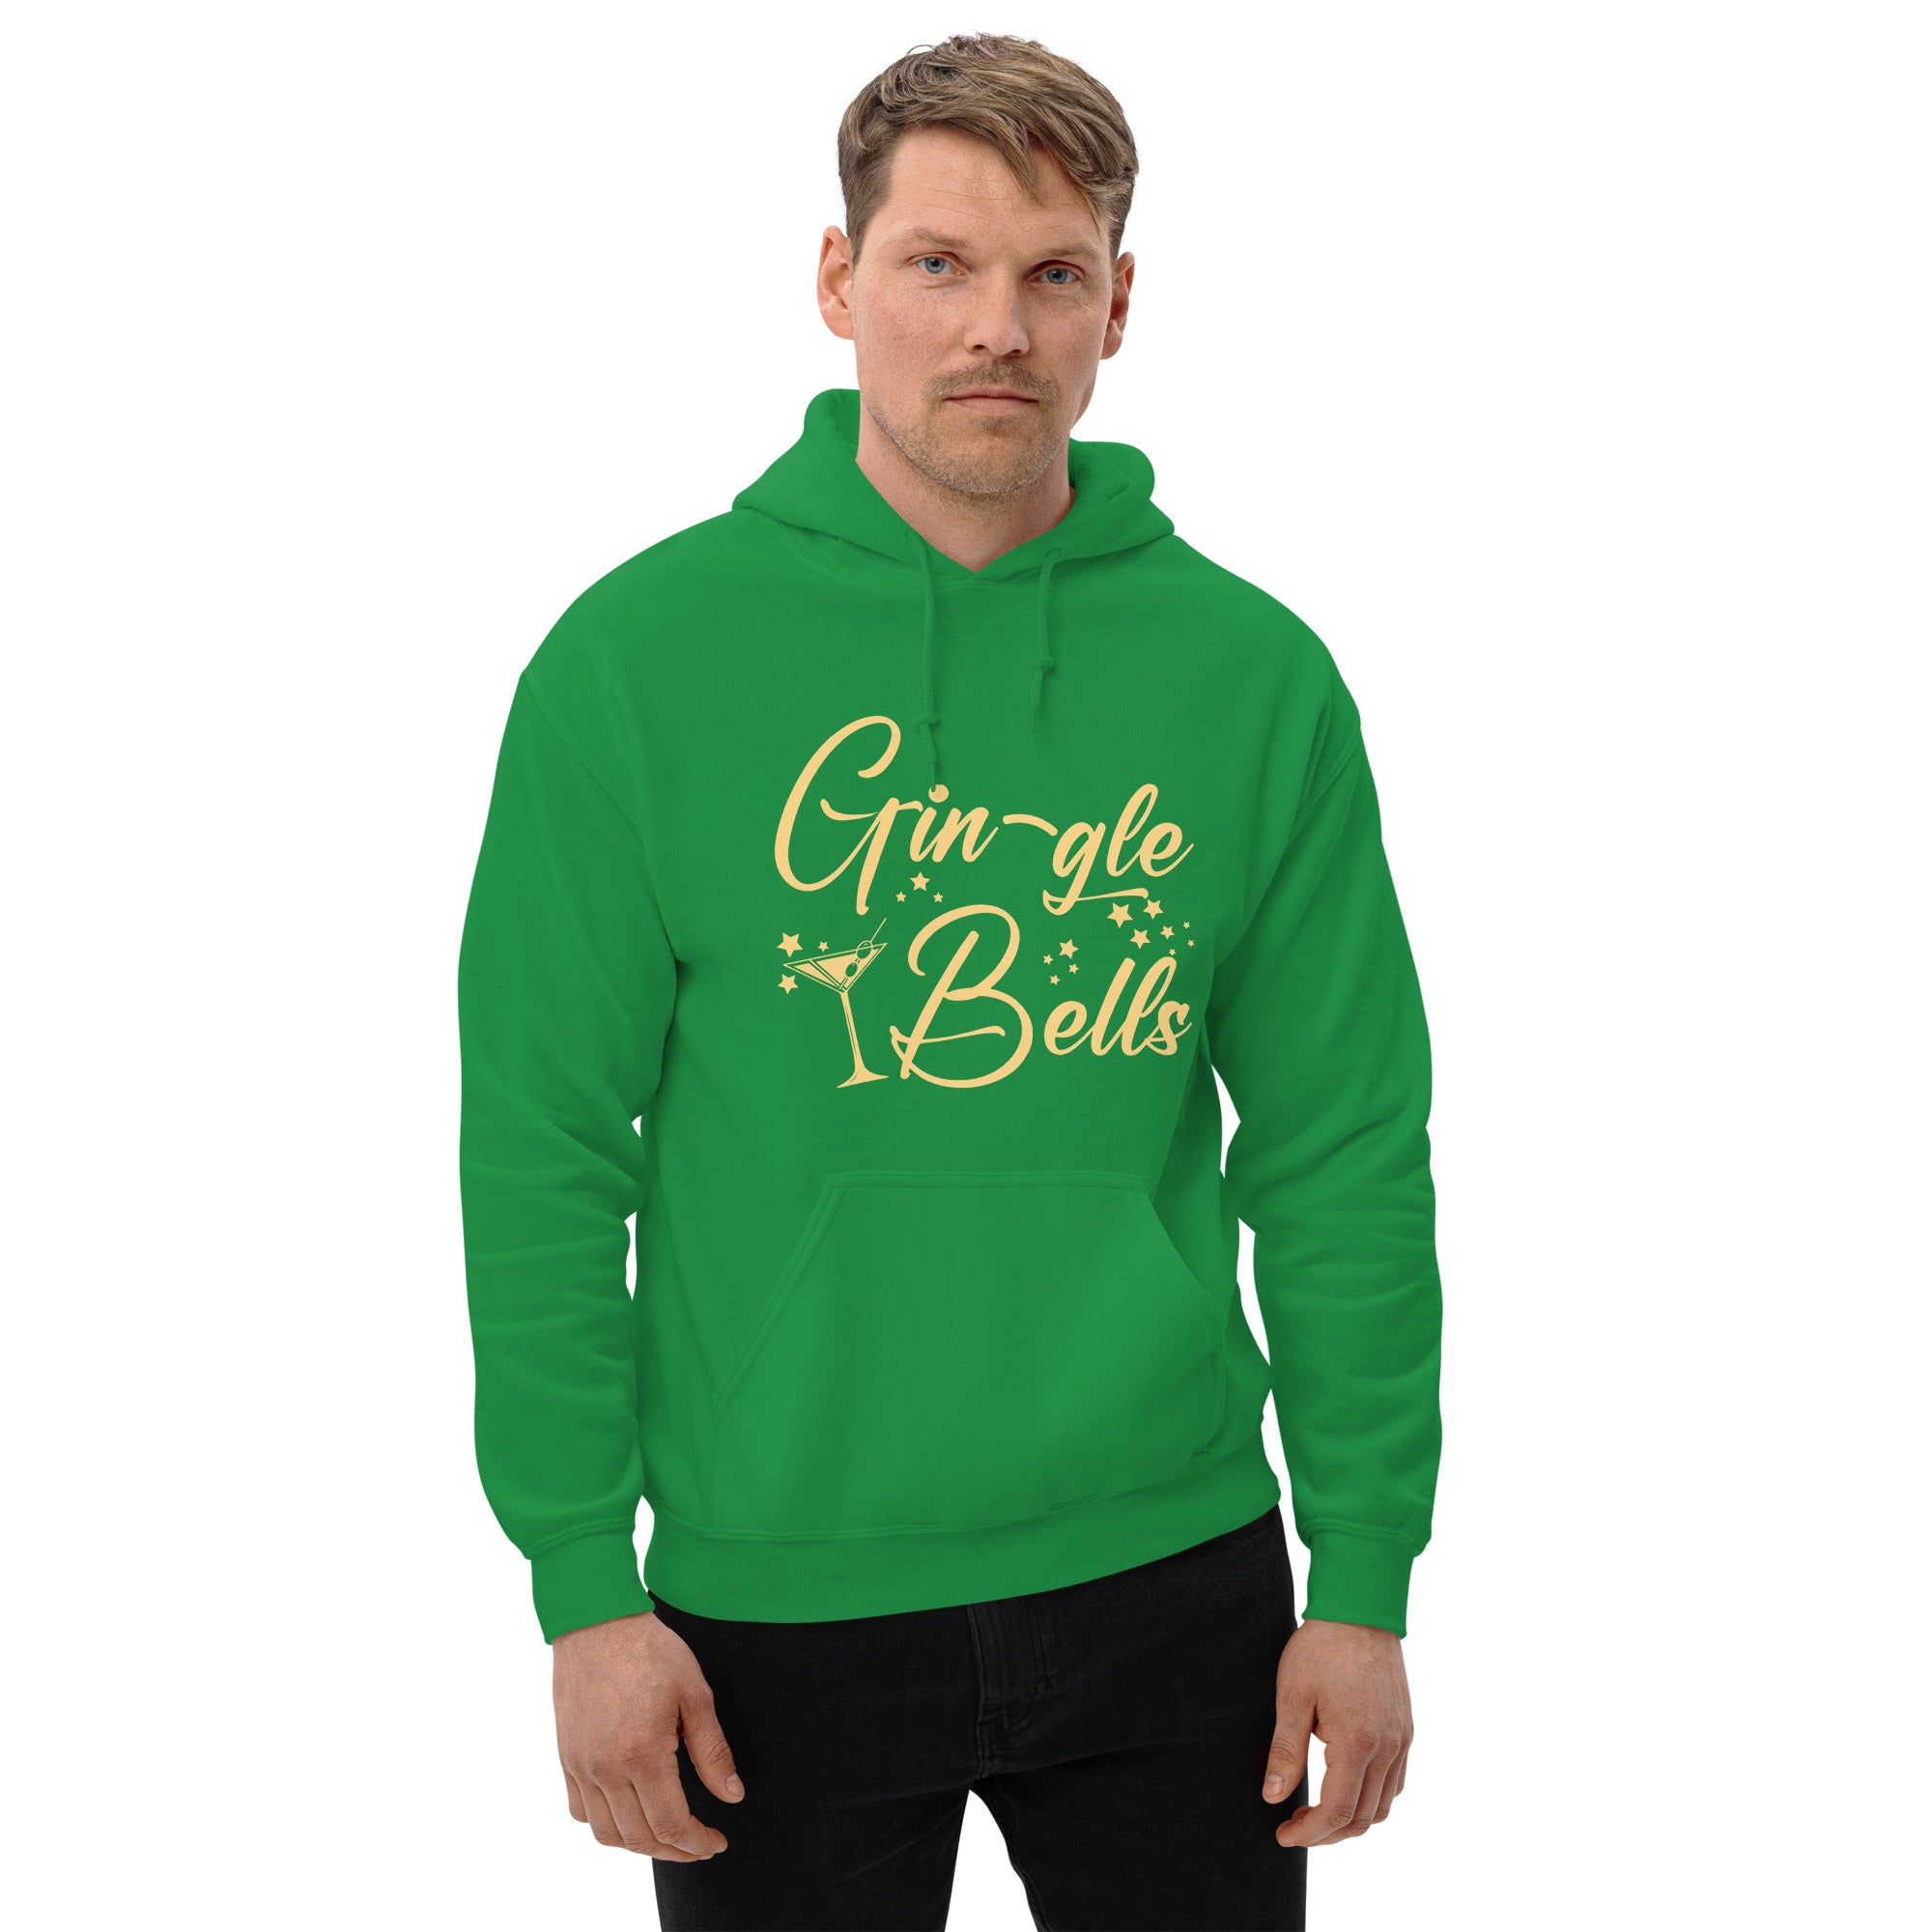 Gin-gle Bells Christmas Gin Tonic Alcohol Christmas Cocktail Xmas Gin Lover Men's Hoodie